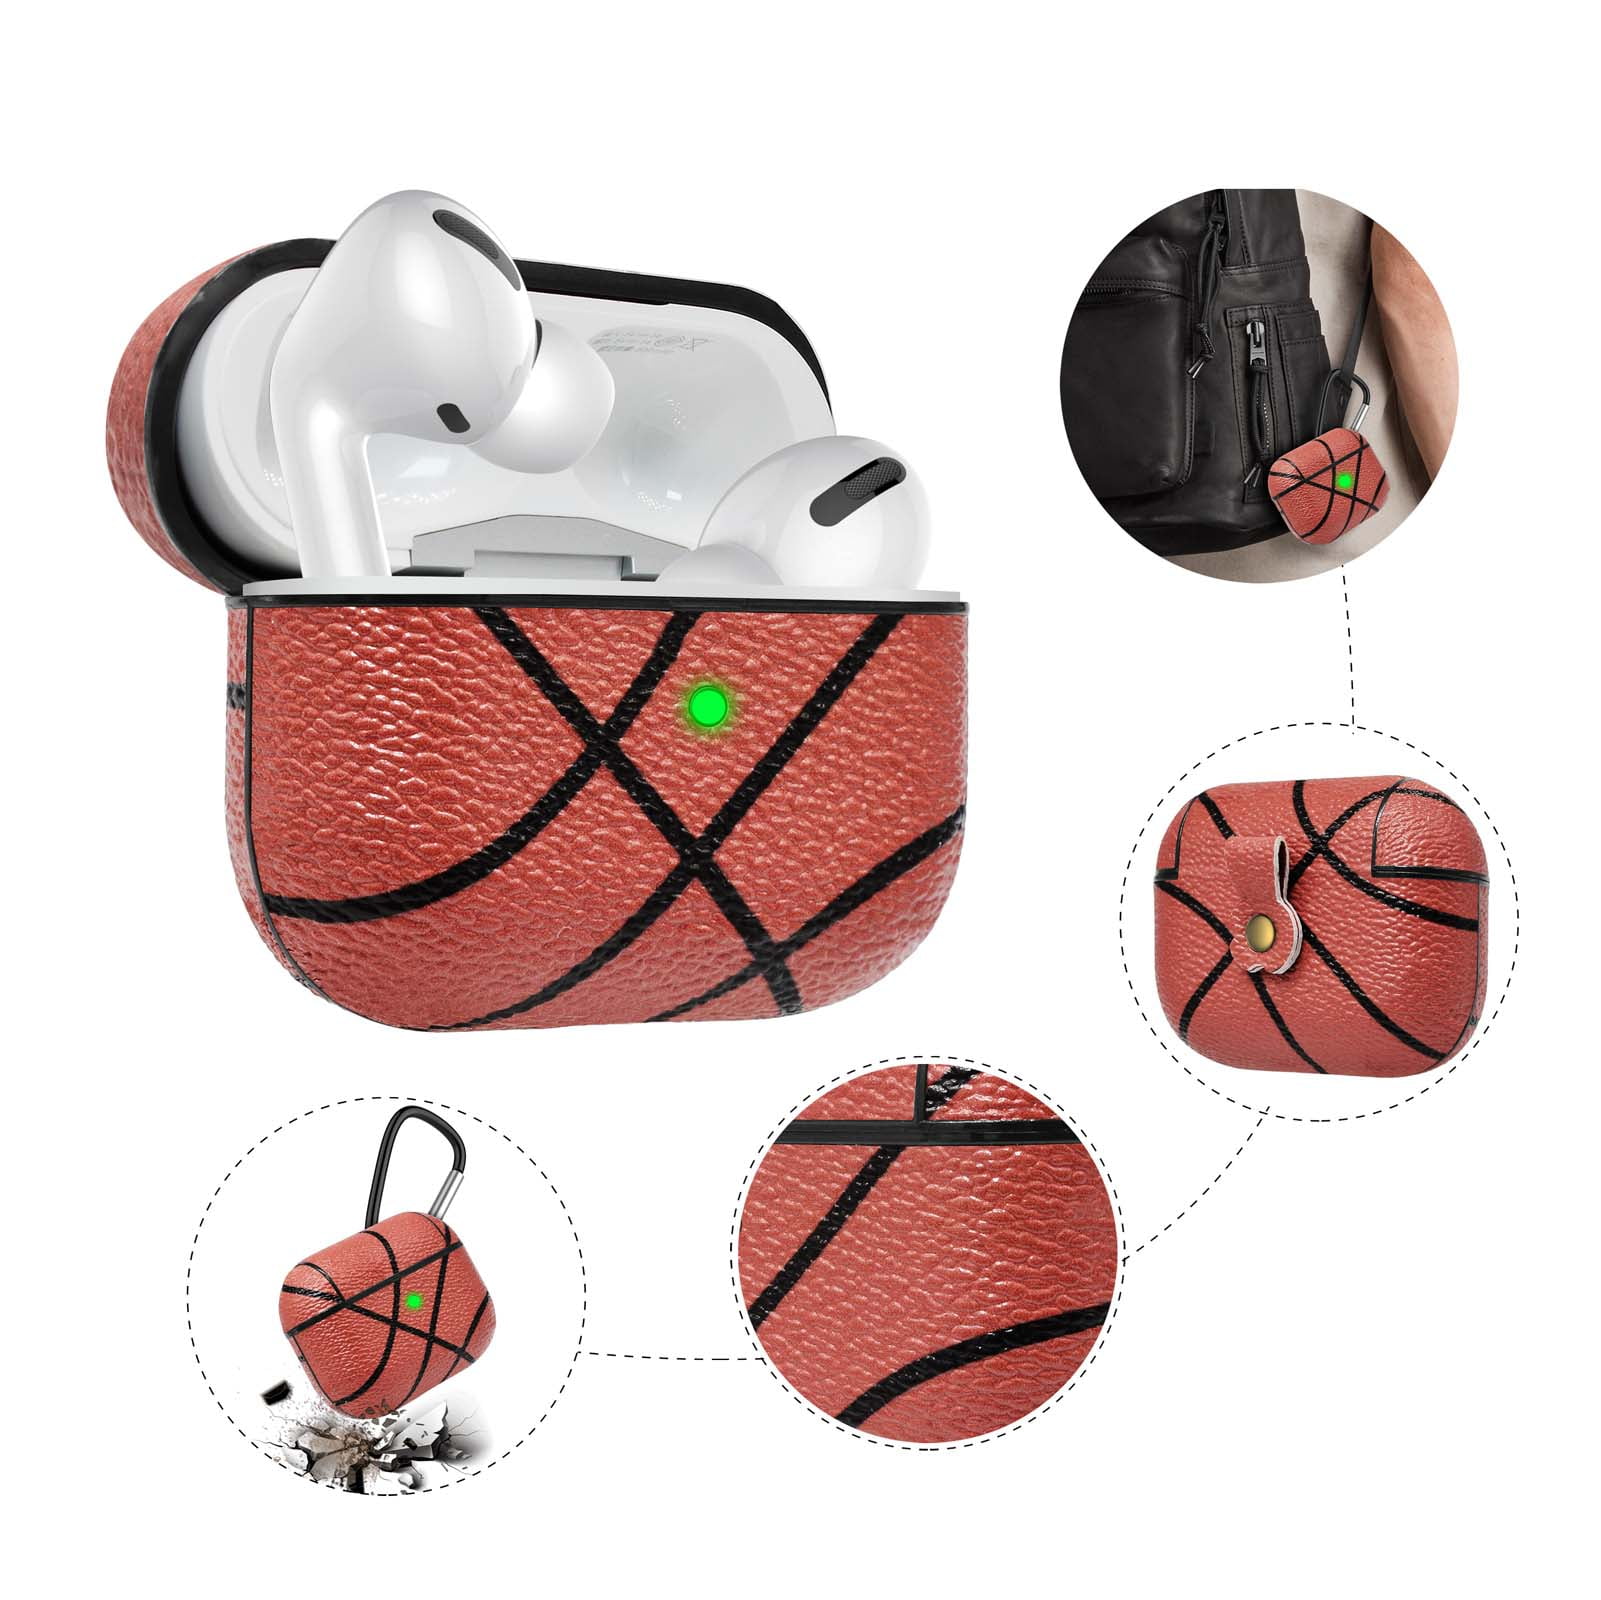  Njjex AirPods Case, AirPods PU Leather Hard Case